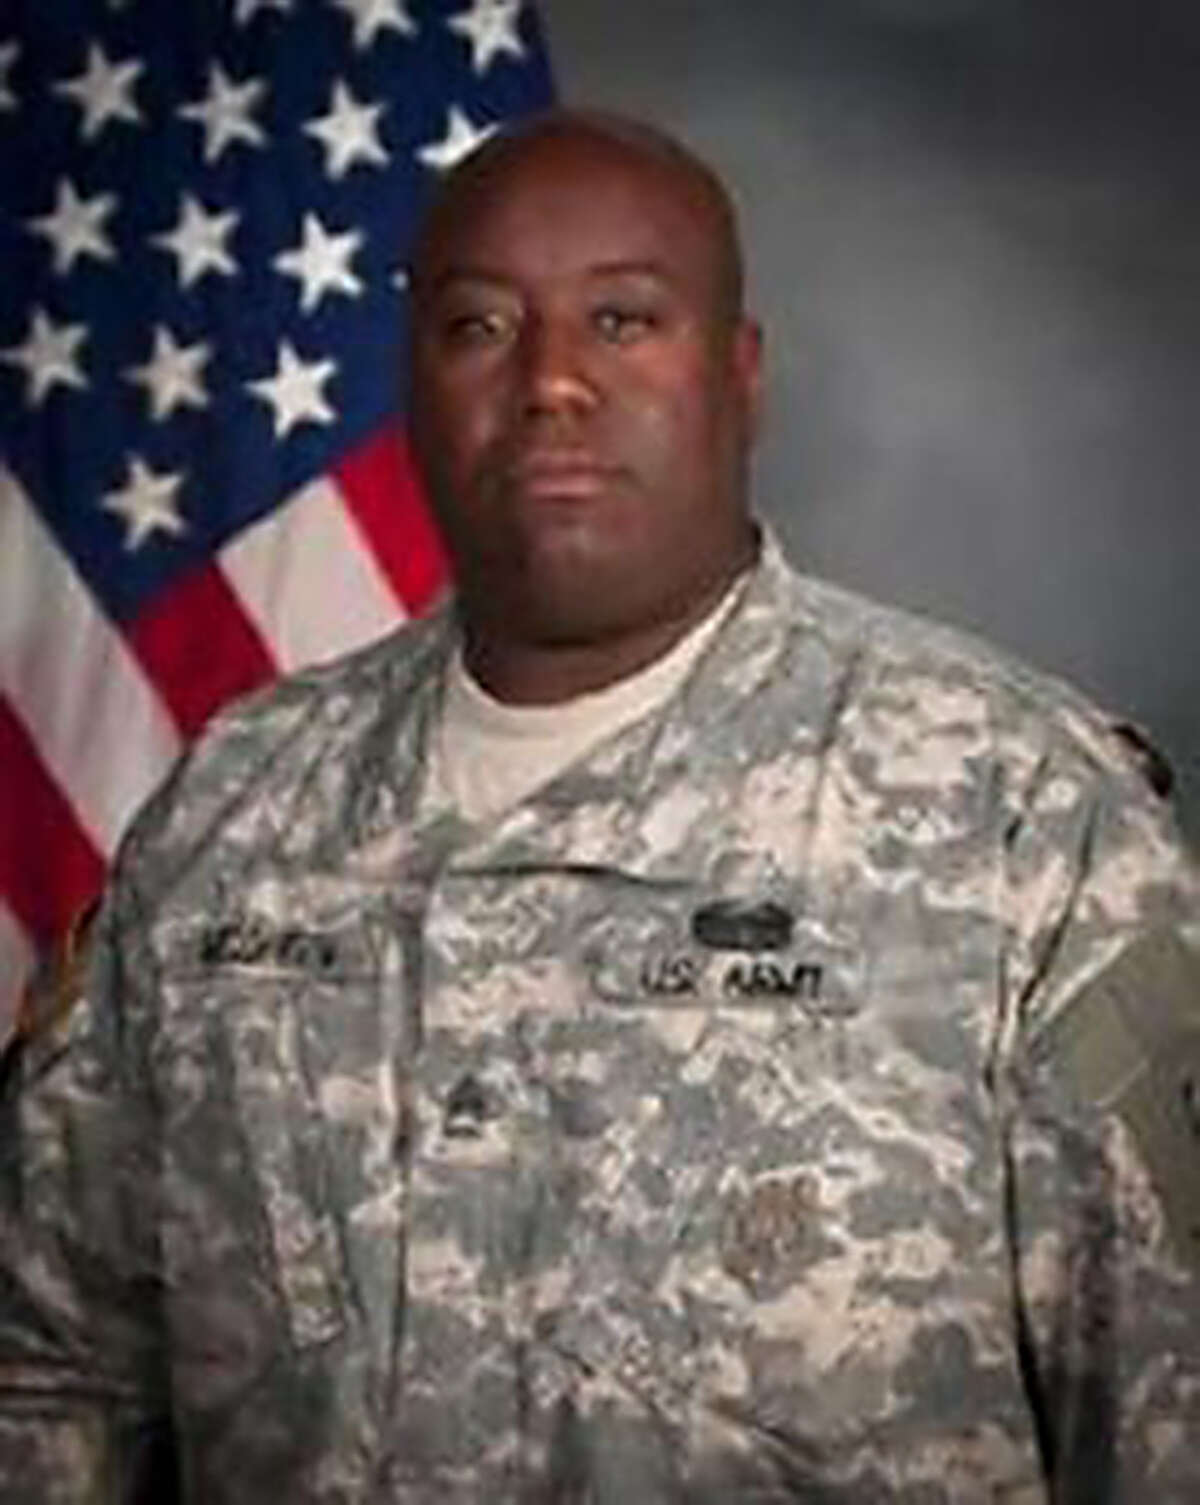 Sgt. 1st Class Gregory McQueen’s plea deal likely will reduce the maximum 40½ years he faces.